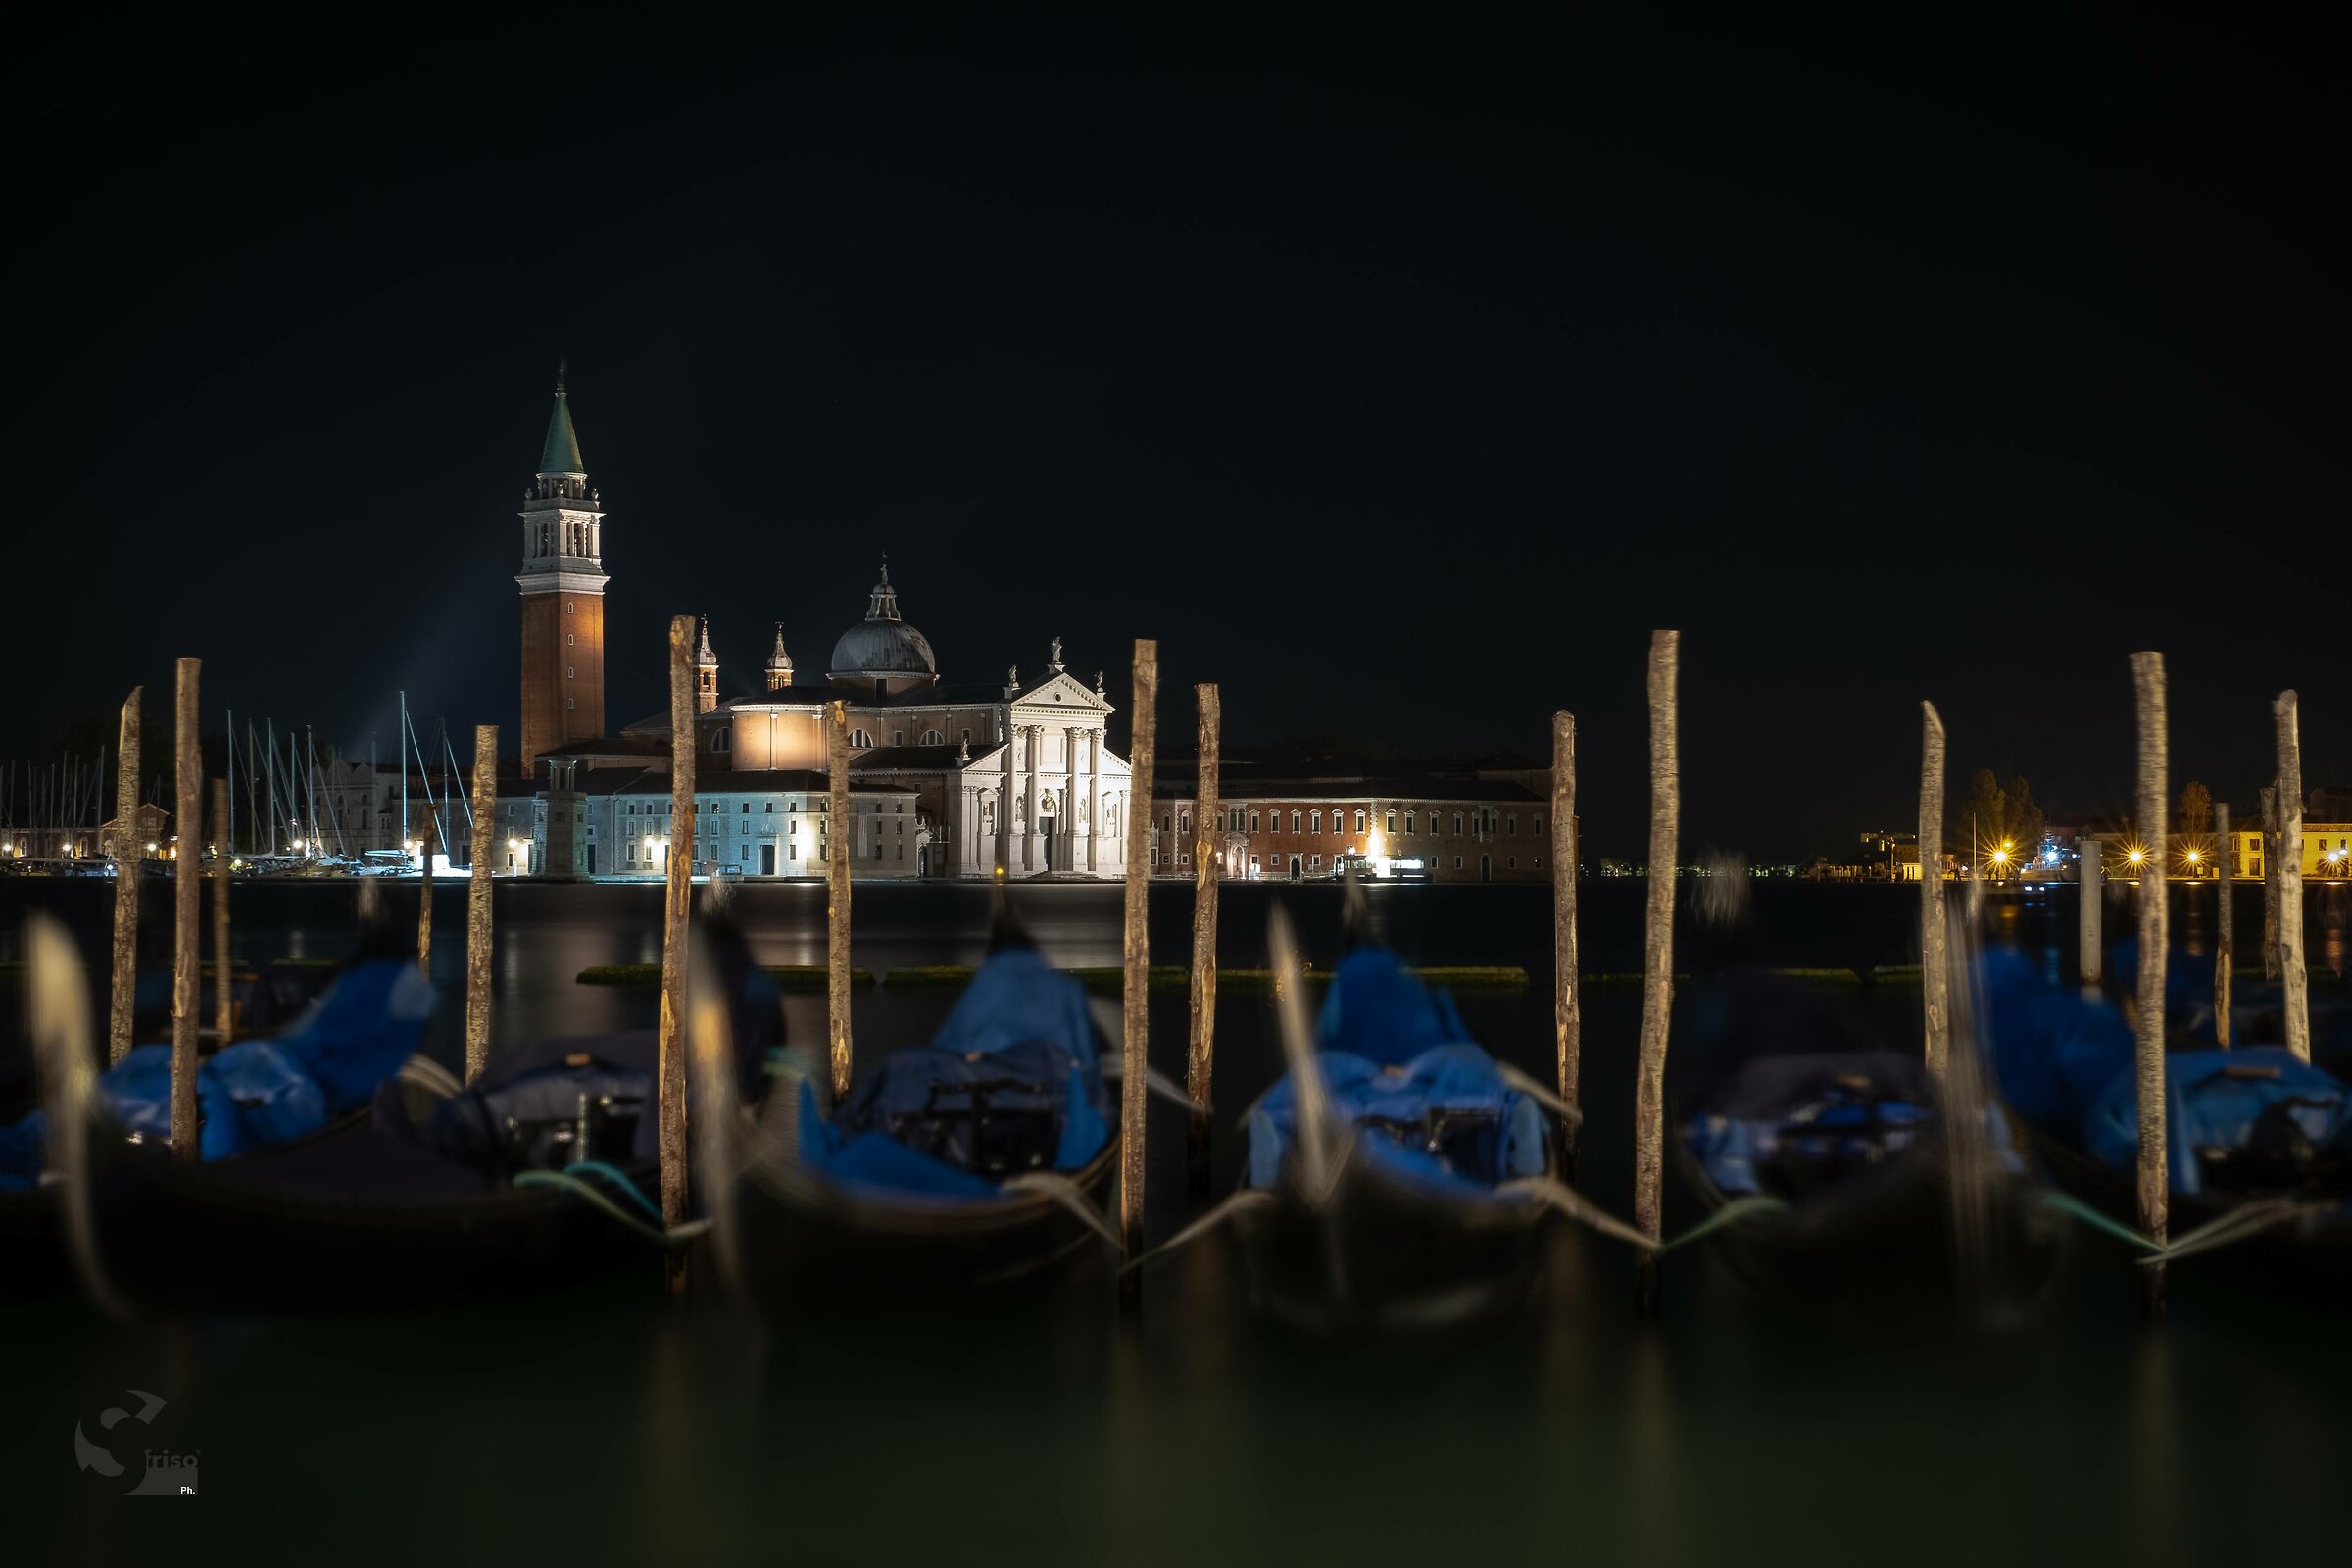 St. George in the Night of Venice...